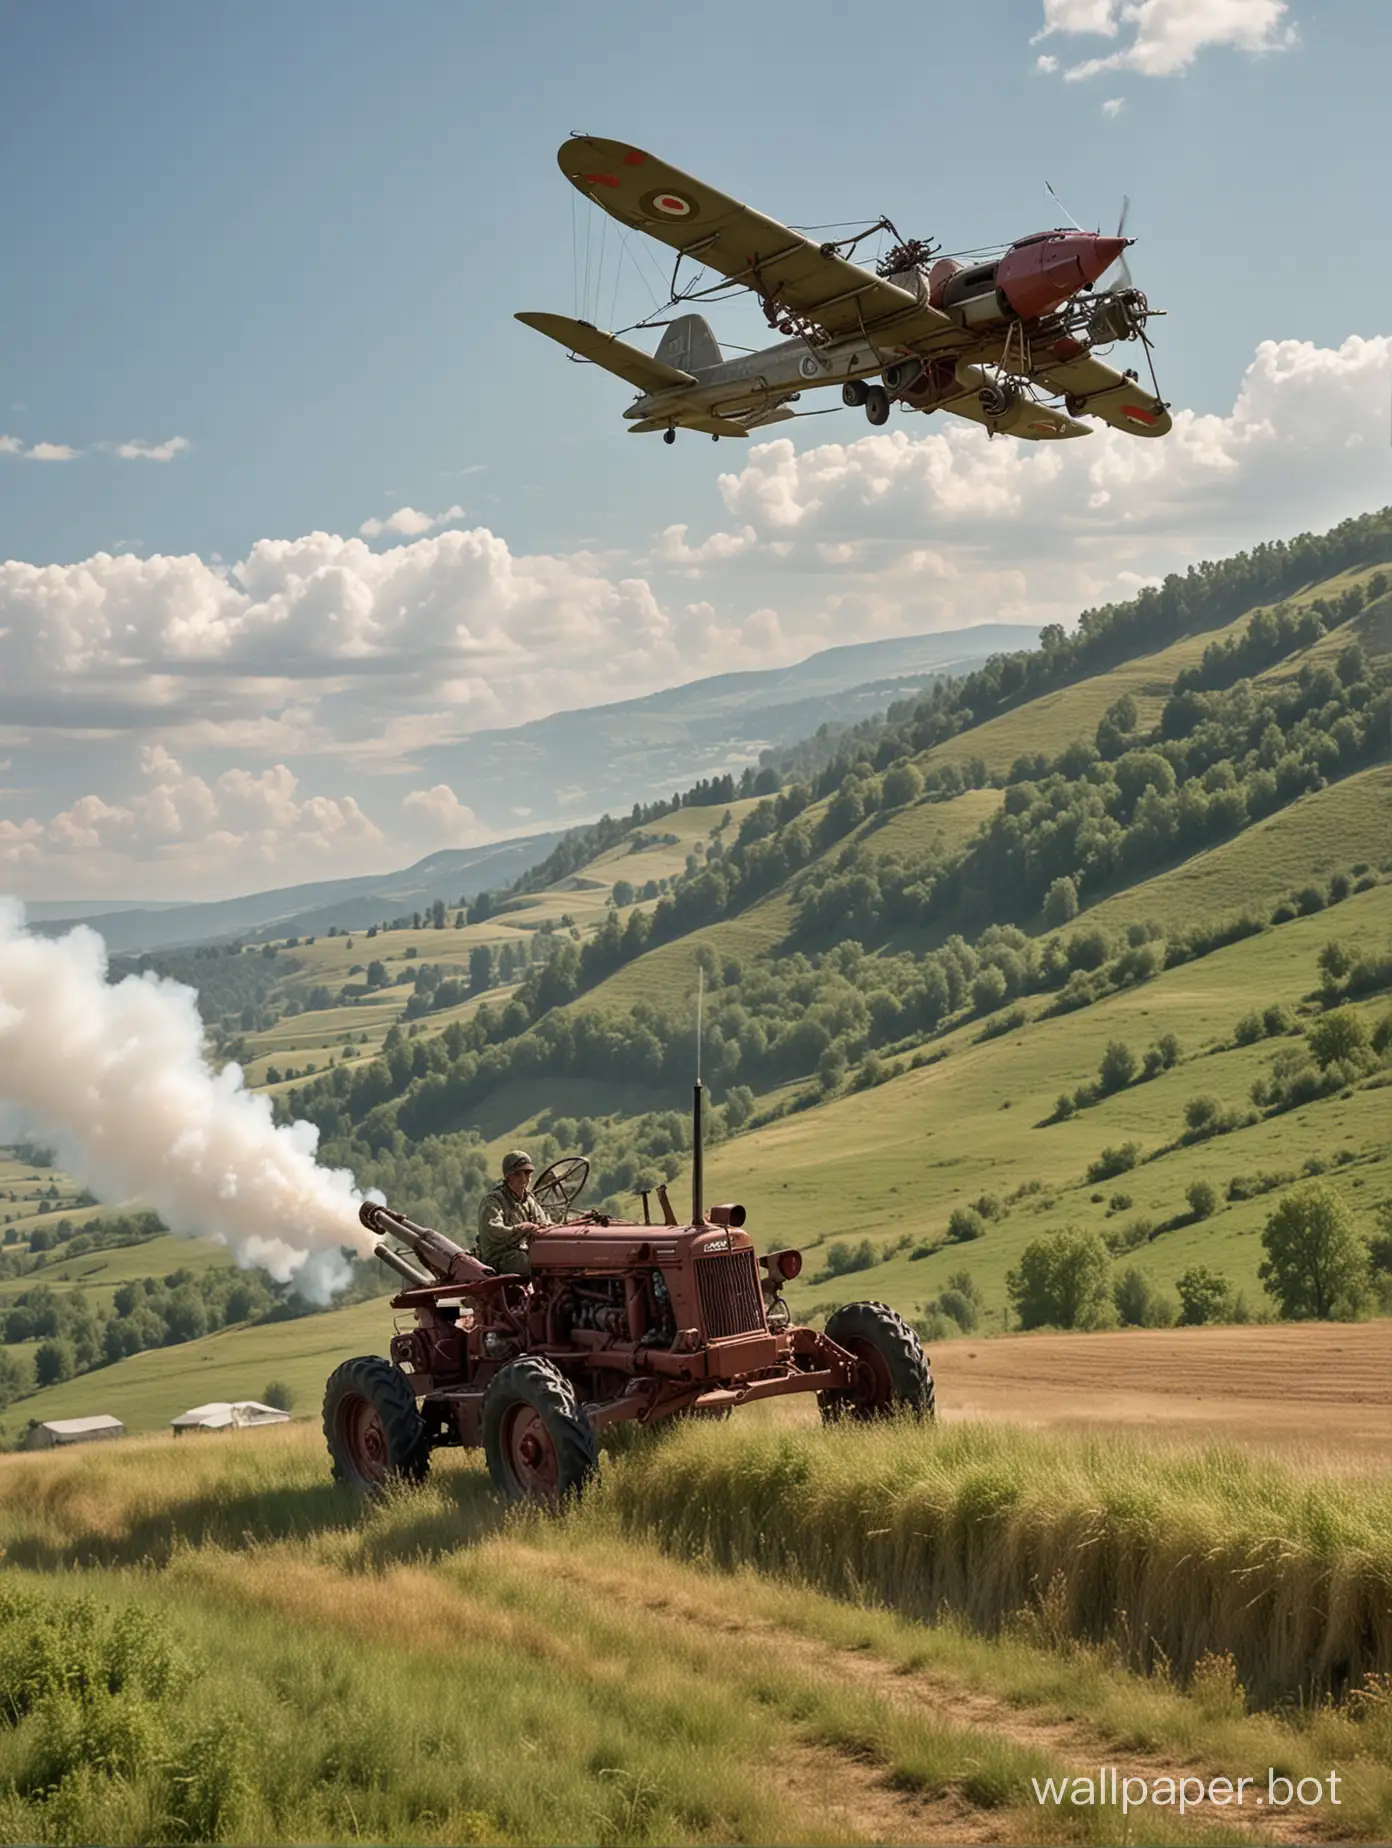 The Zenith AK-630 anti-aircraft gun fires at a low-flying collective farm tractor above the hilltop, qualifying it as a low-flying slow-speed target, and generally they were right. It's hard to think of something more low-flying and slower.